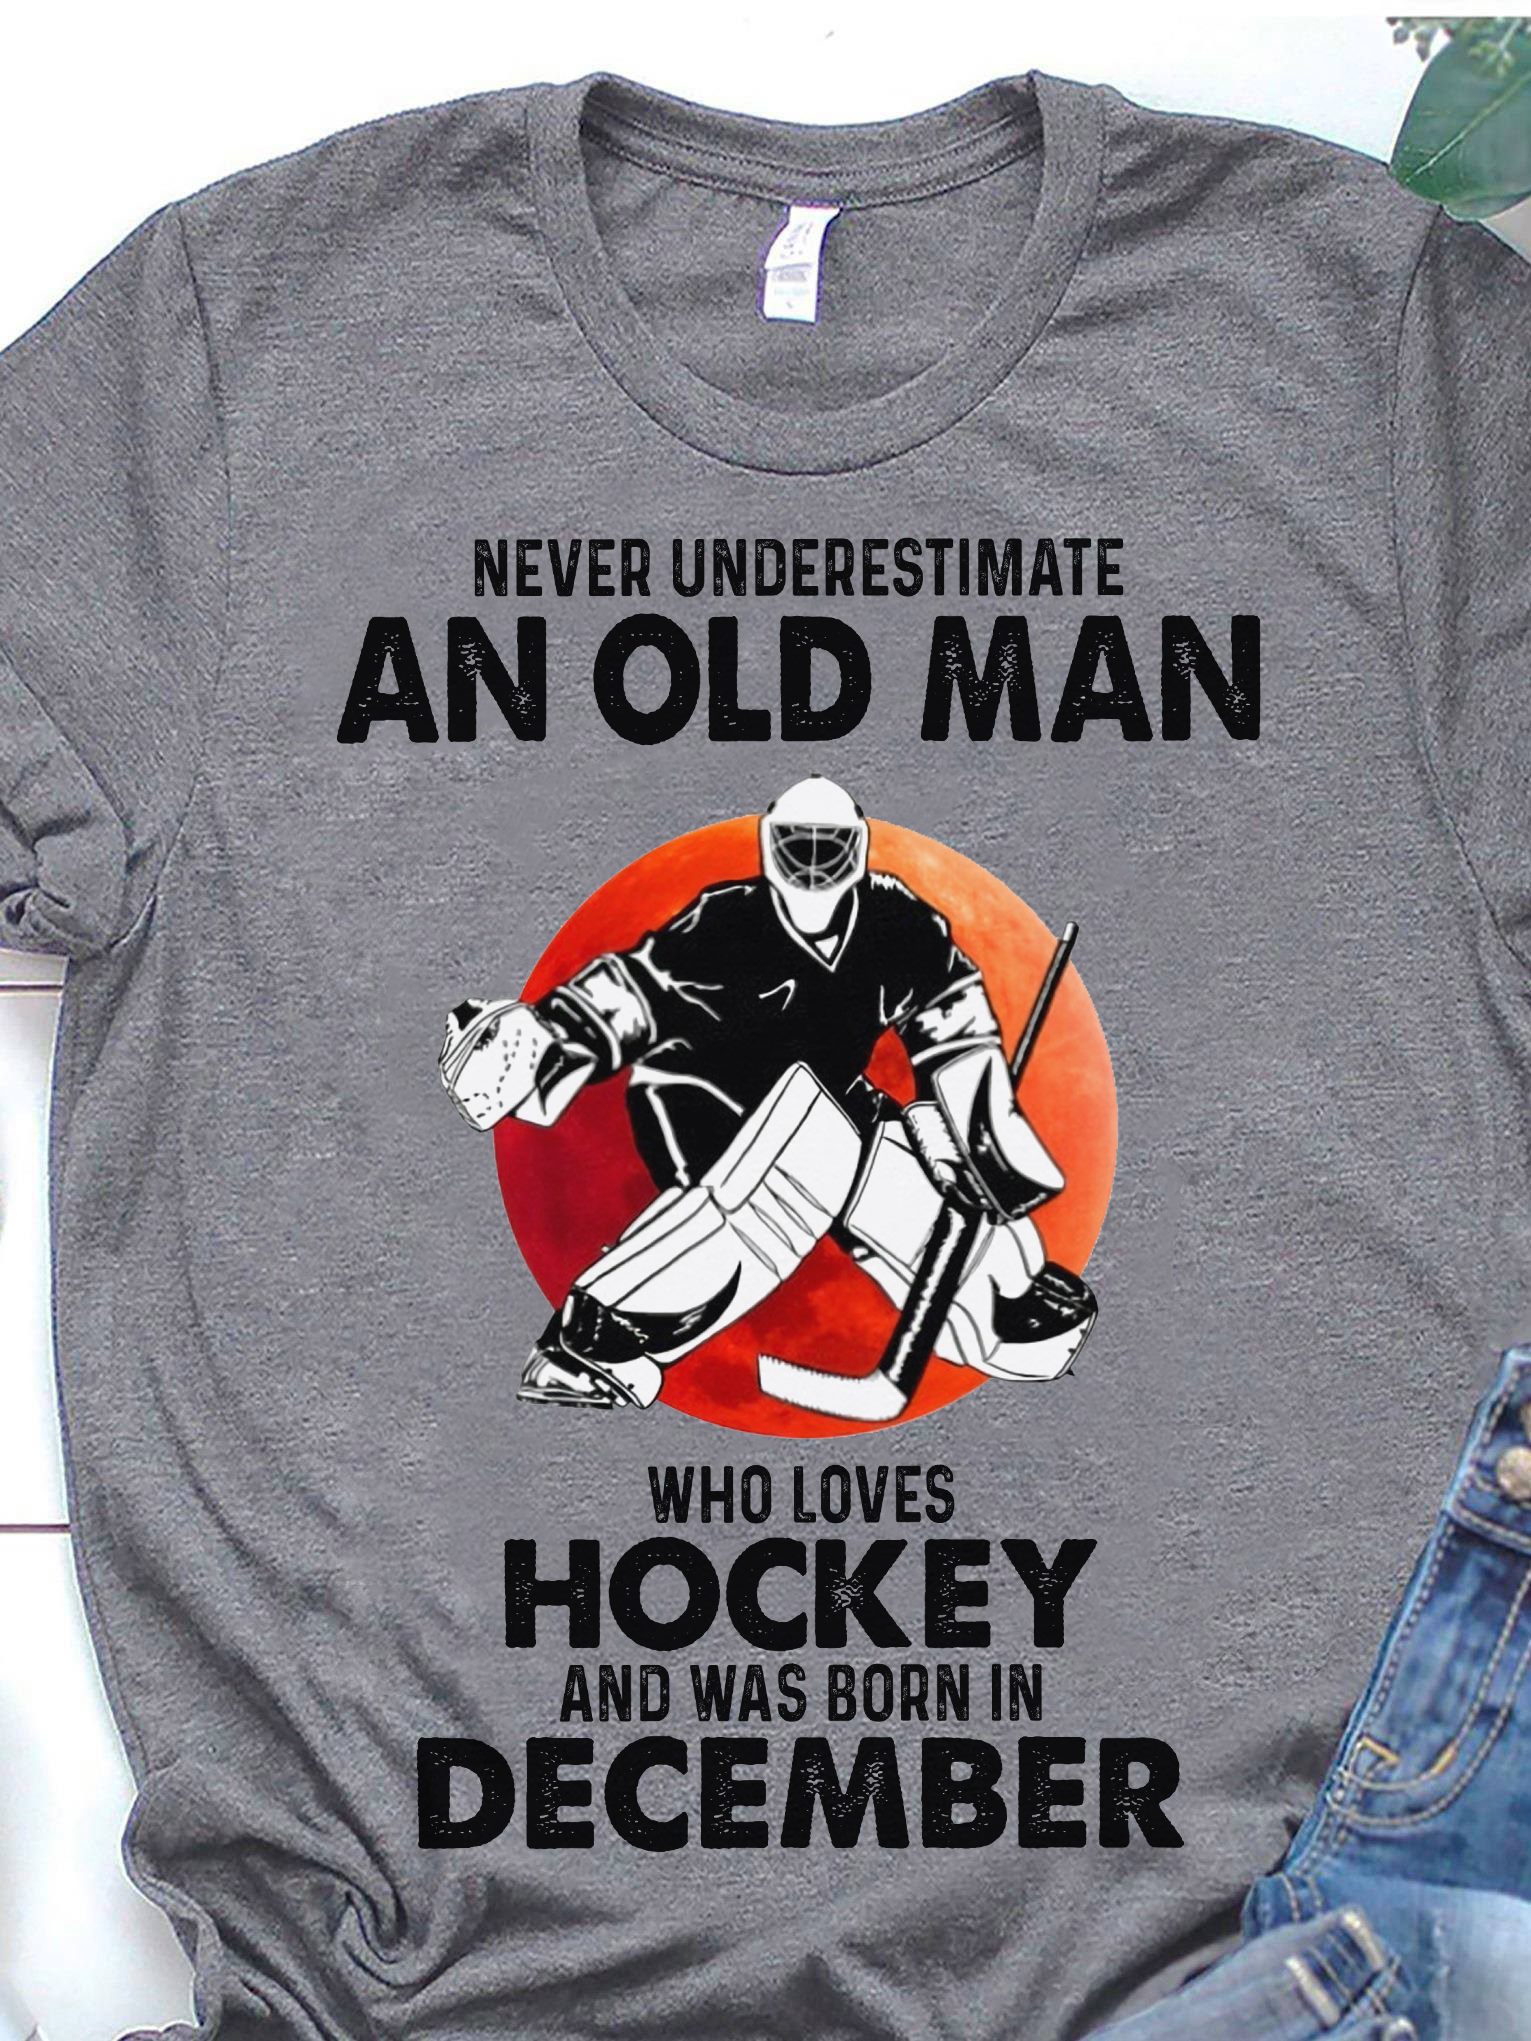 Never underestimate an old man who loves hockey and was born in December